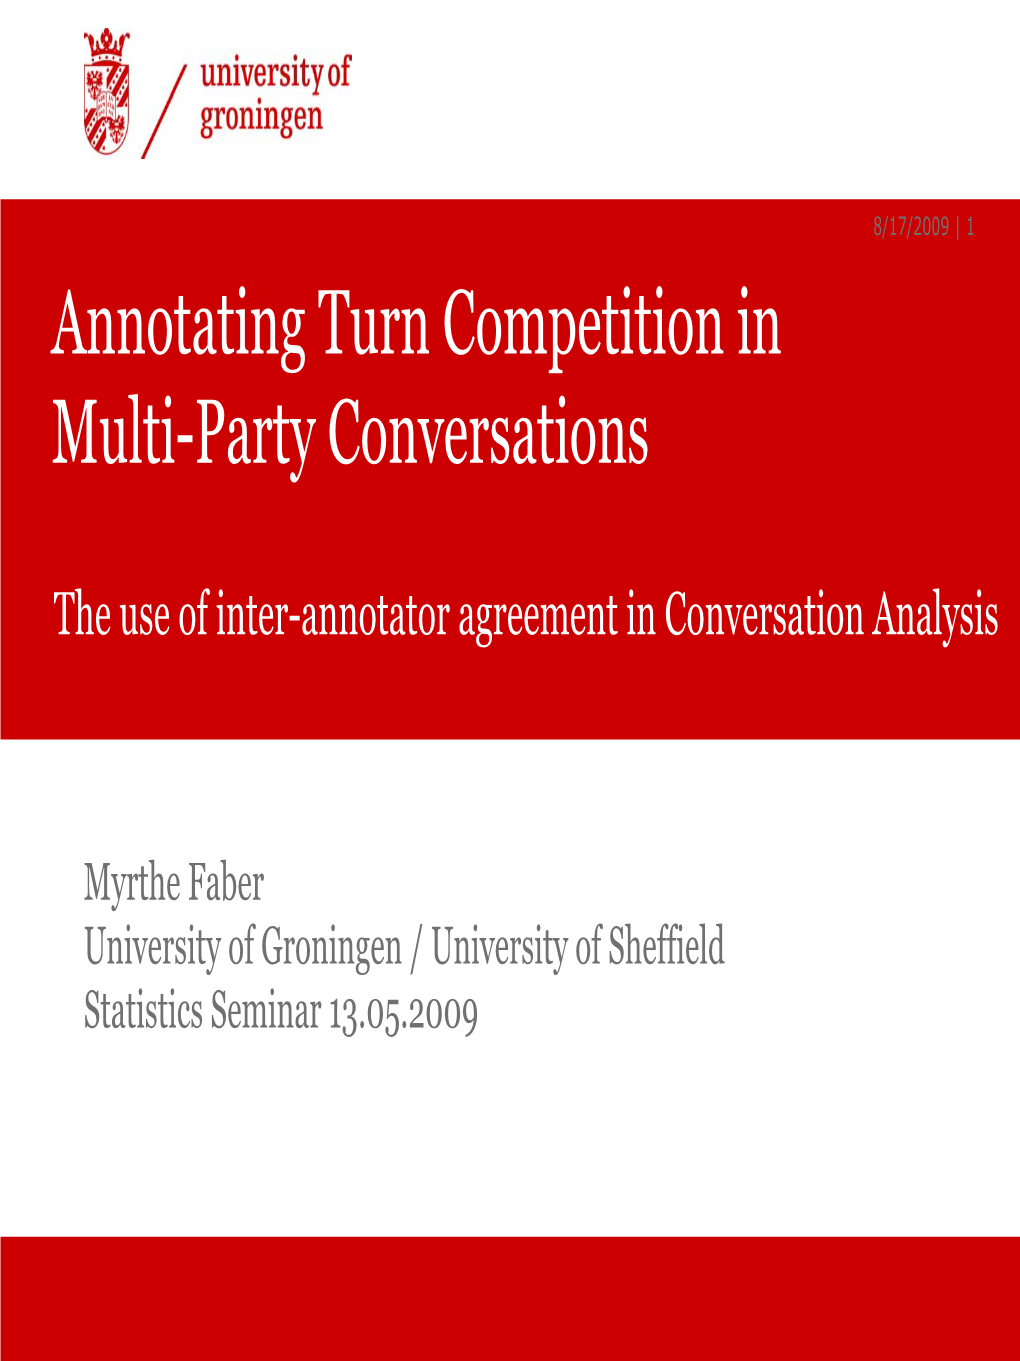 Annotating Turn Competition in Multi-Party Conversations